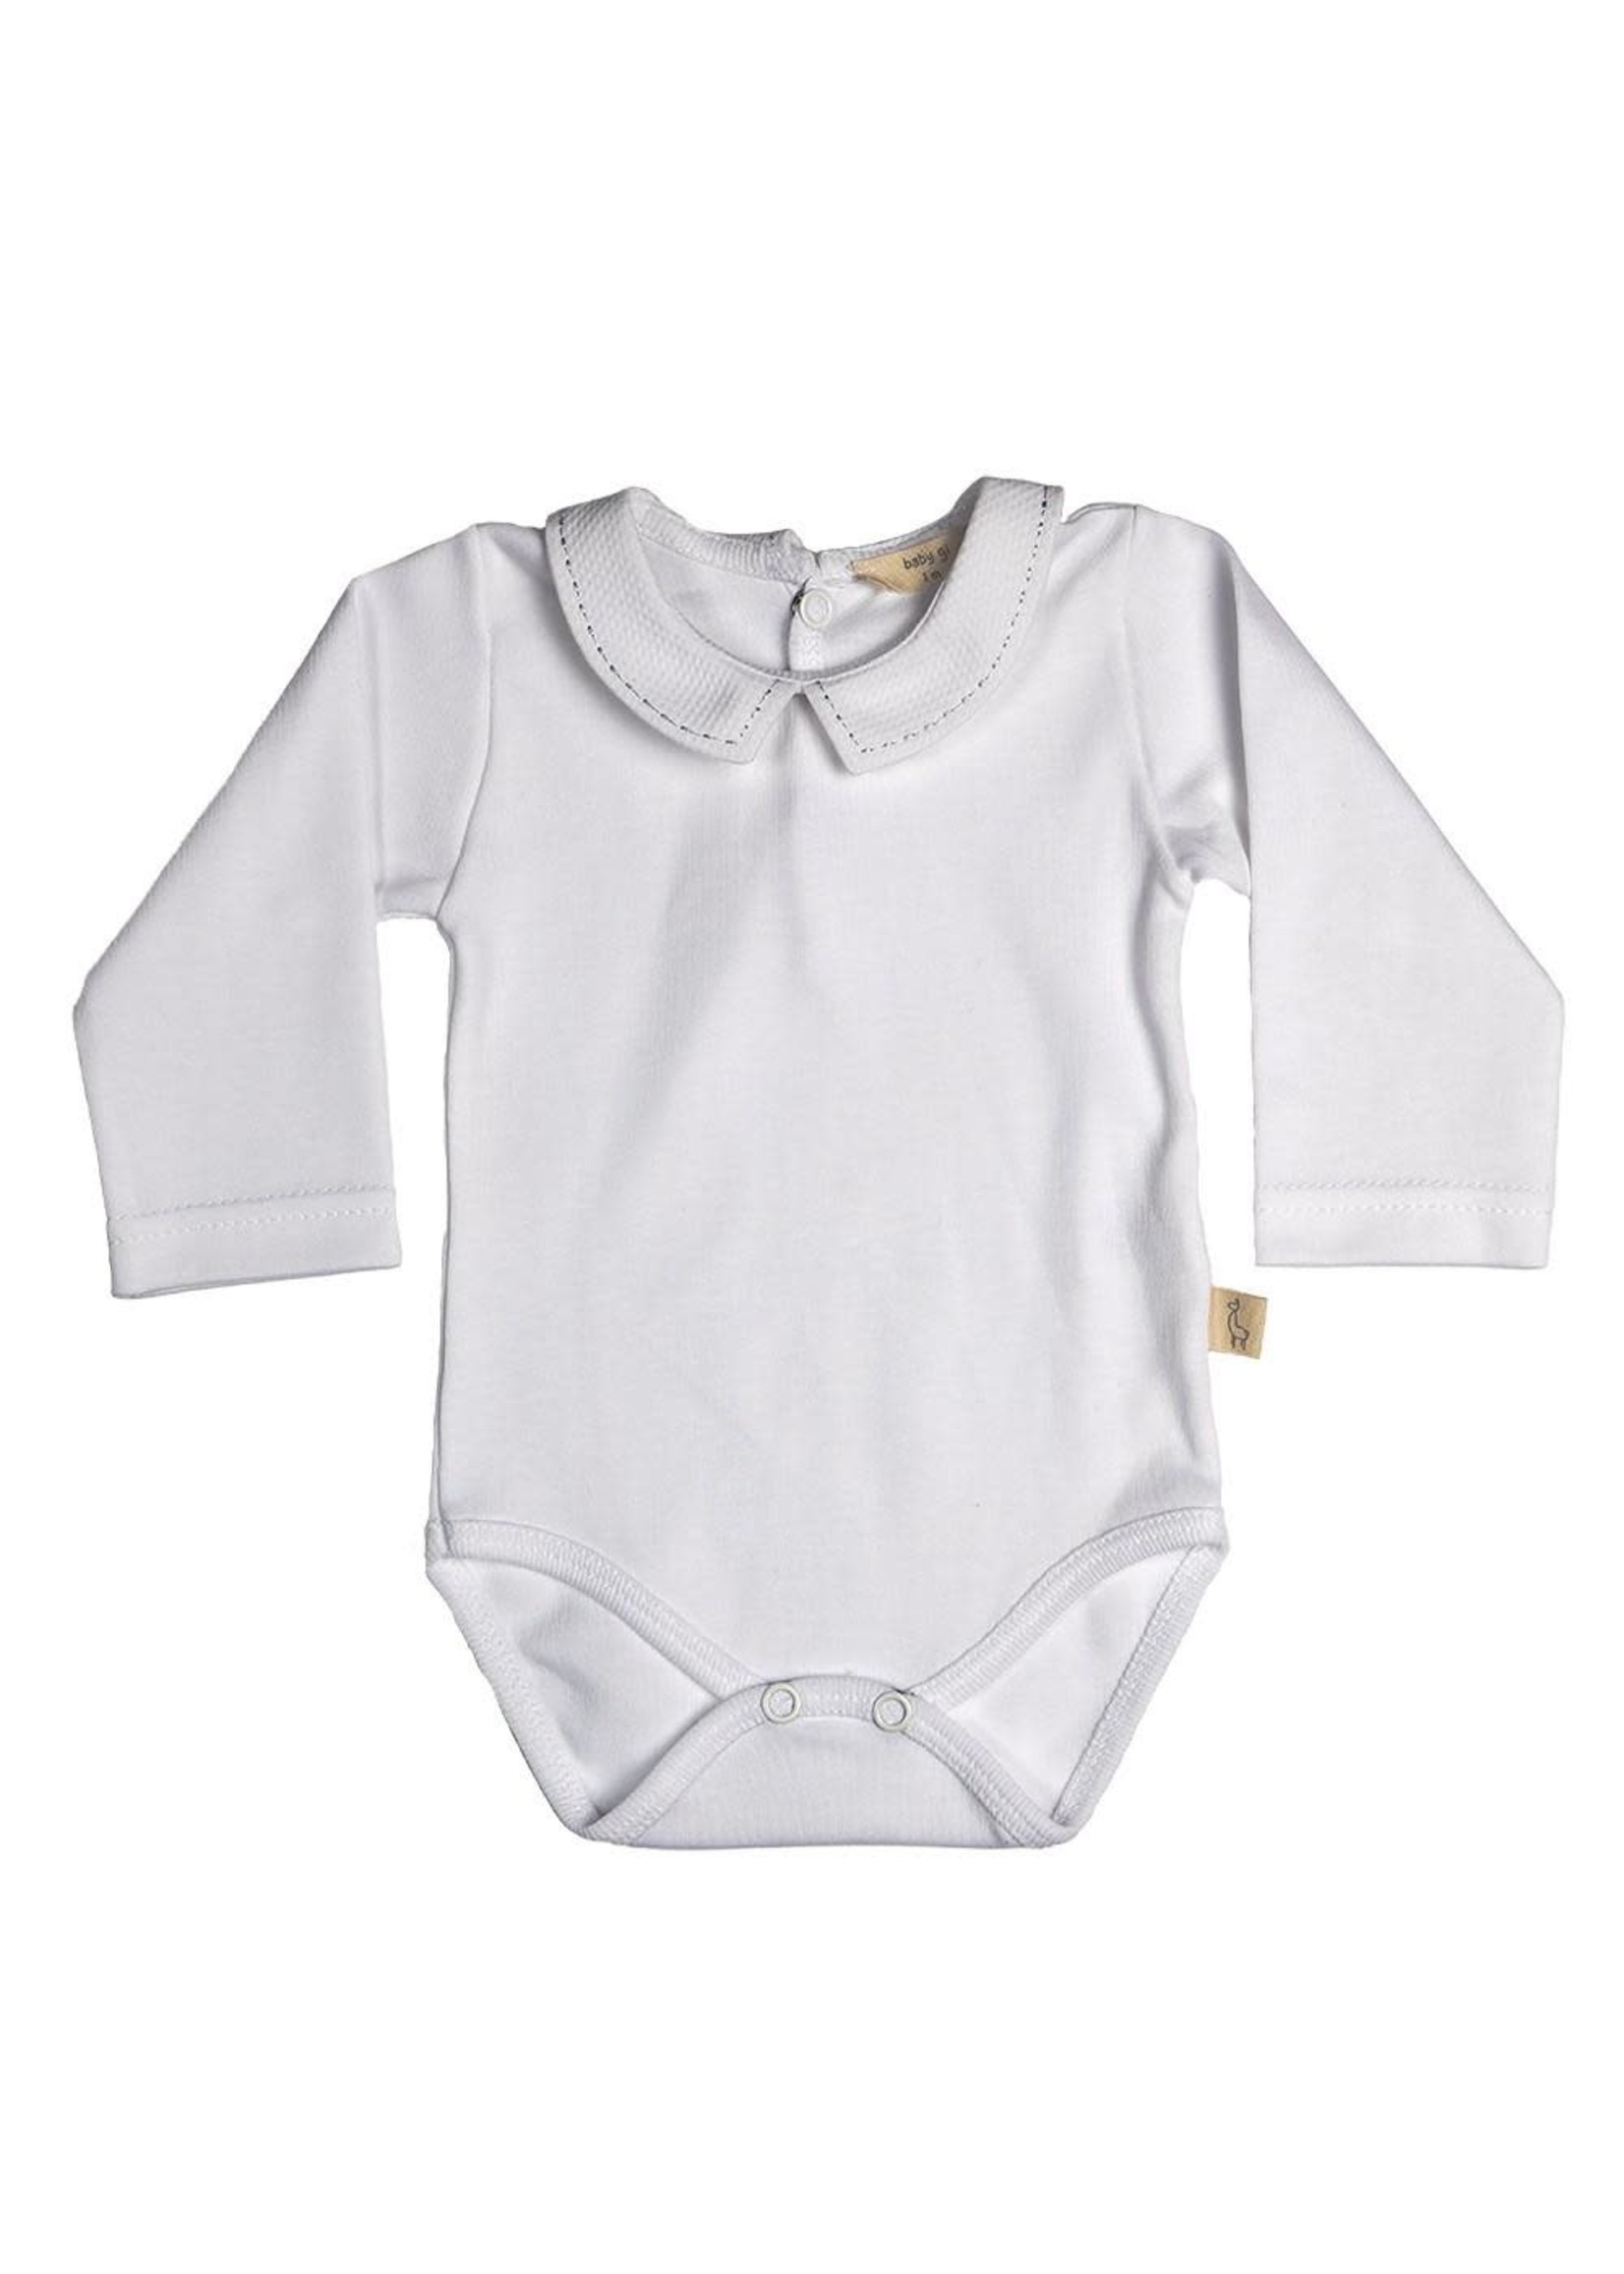 Baby Gi Romper With Pique Collar - Stitches Grey